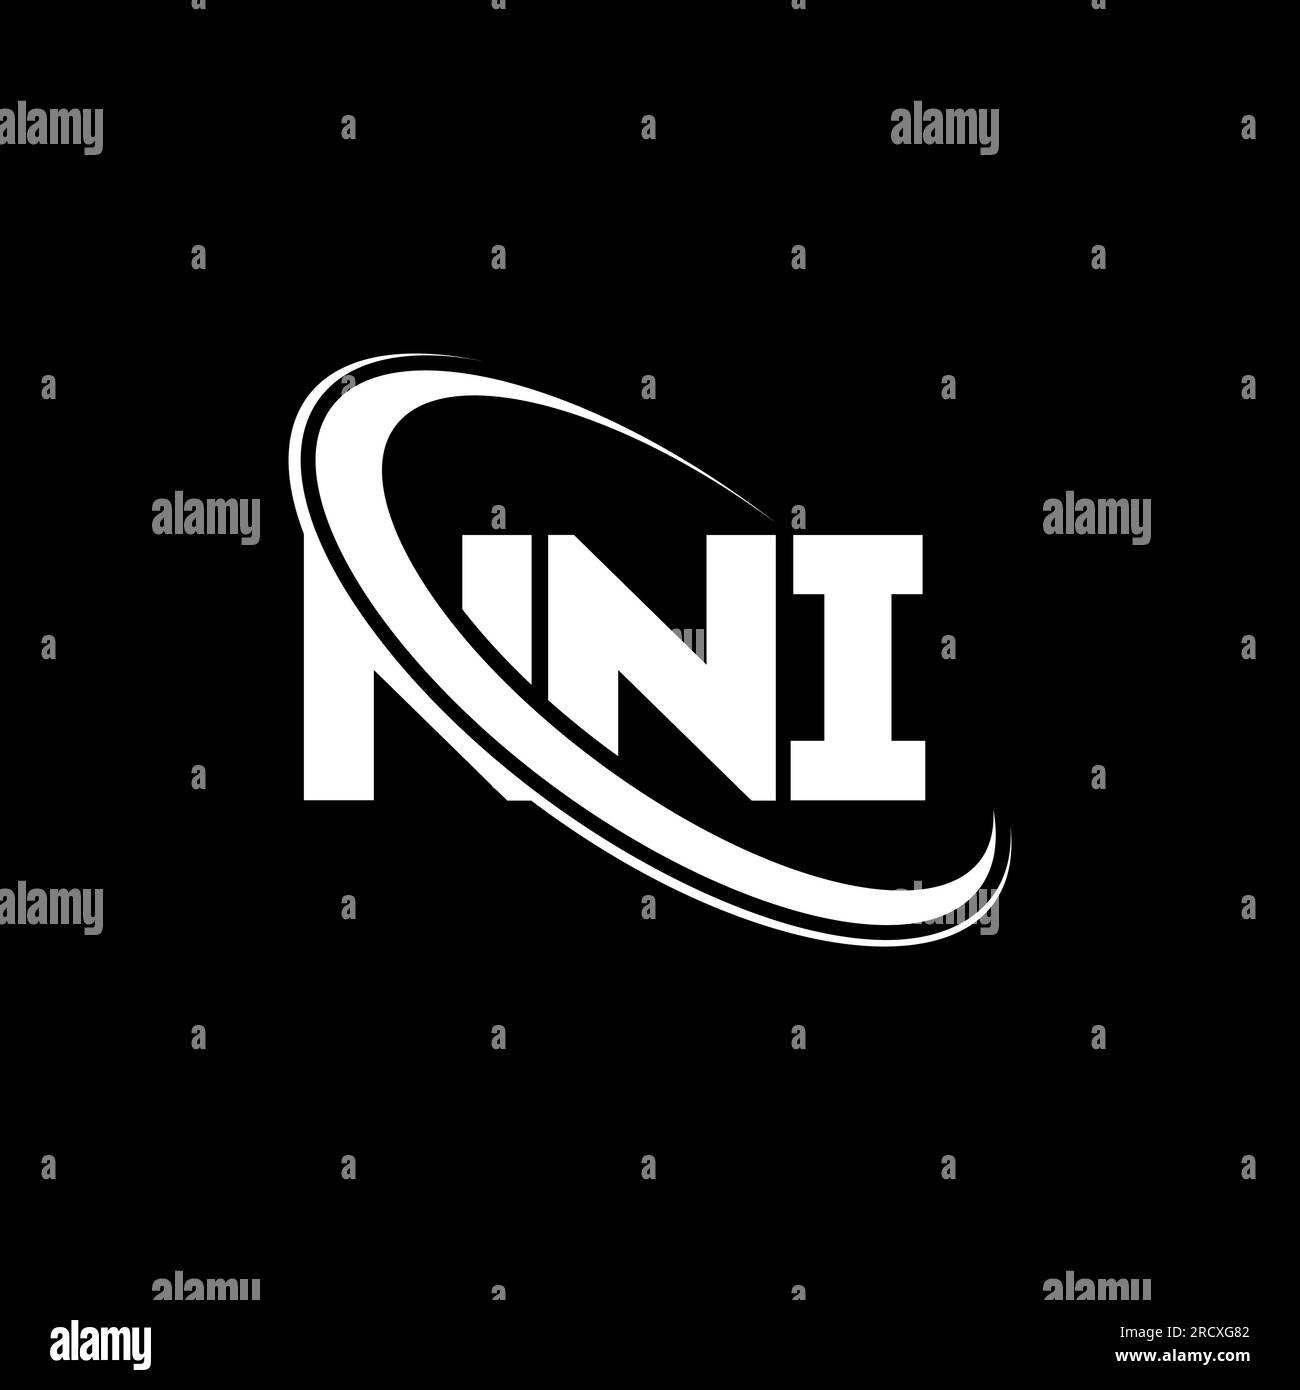 NNI logo. NNI letter. NNI letter logo design. Initials NNI logo linked with circle and uppercase monogram logo. NNI typography for technology, busines Stock Vector